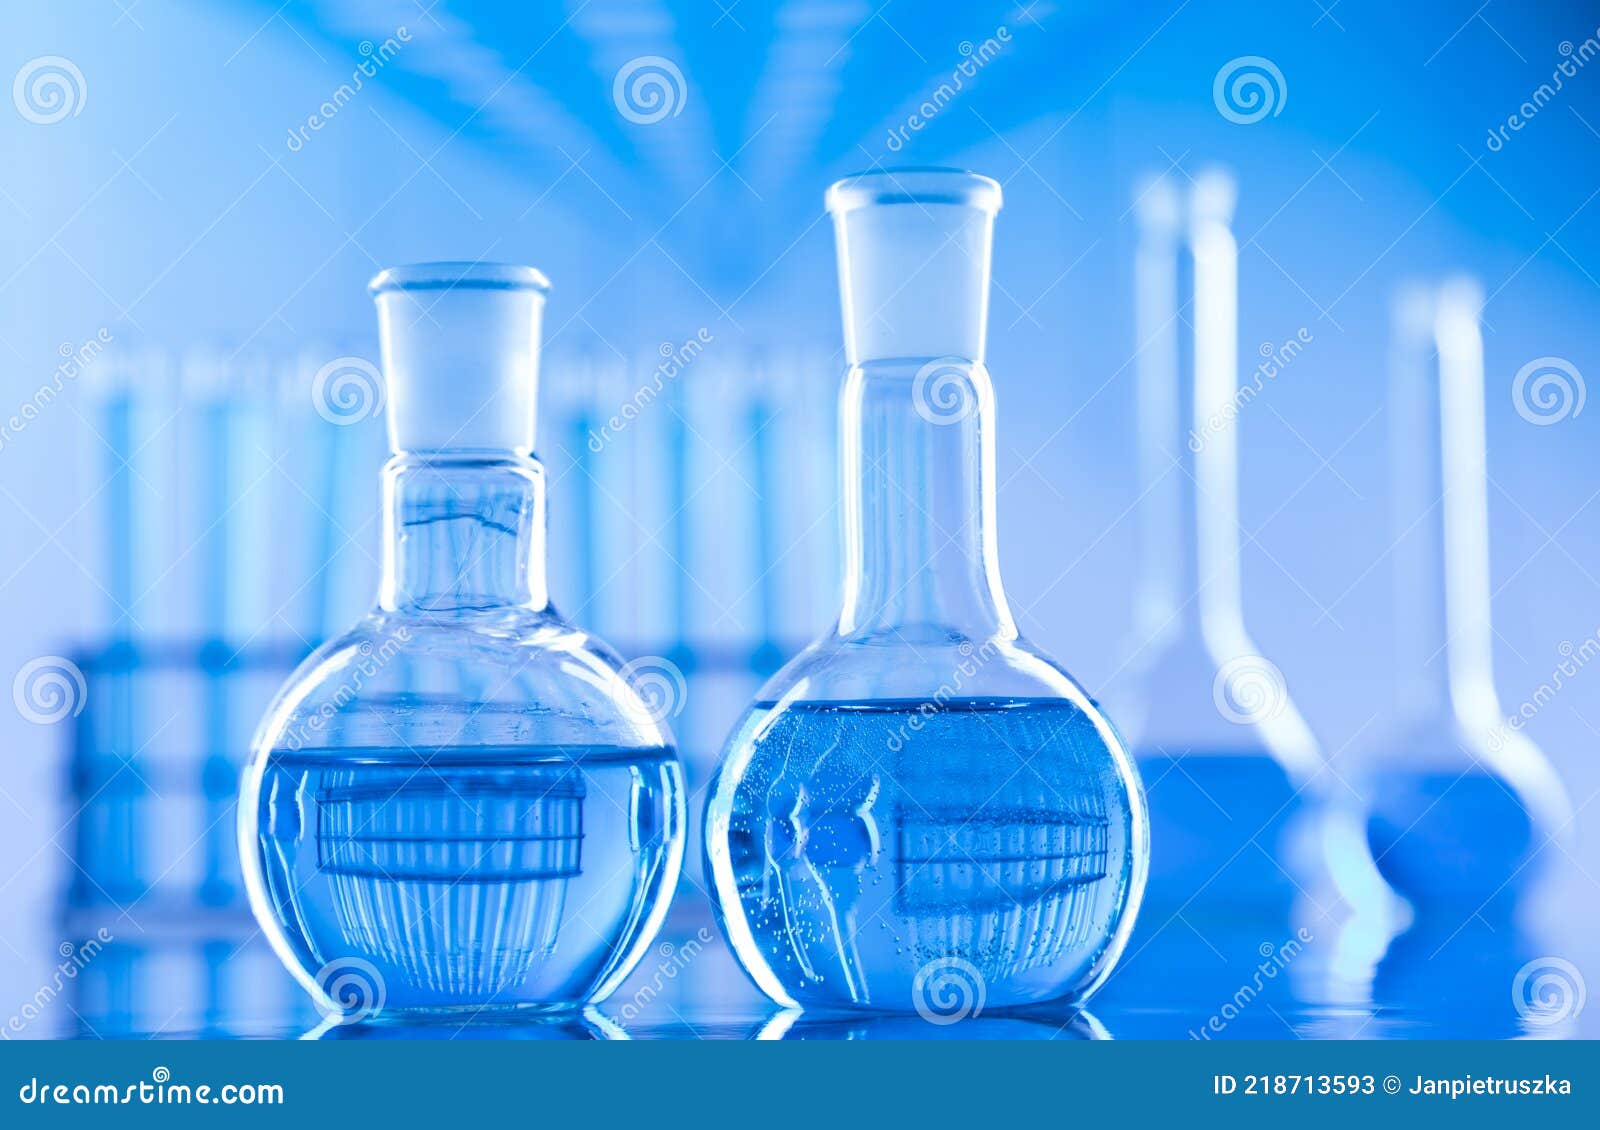 Assorted Laboratory Glassware Equipment Stock Image Image Of Color